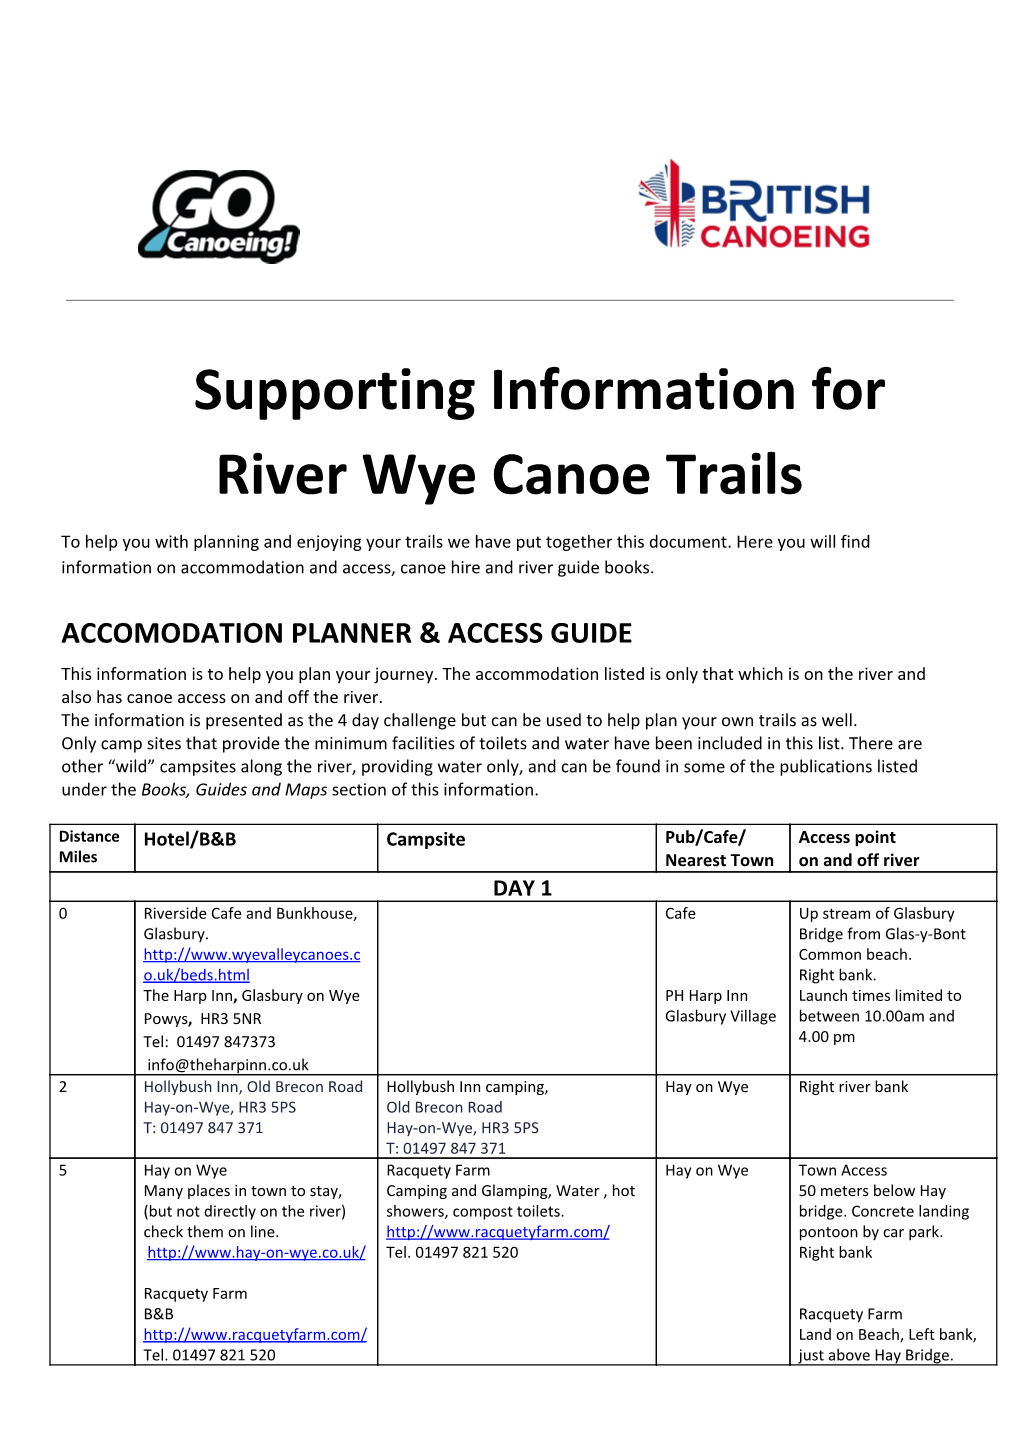 Supporting Information for River Wye Canoe Trails